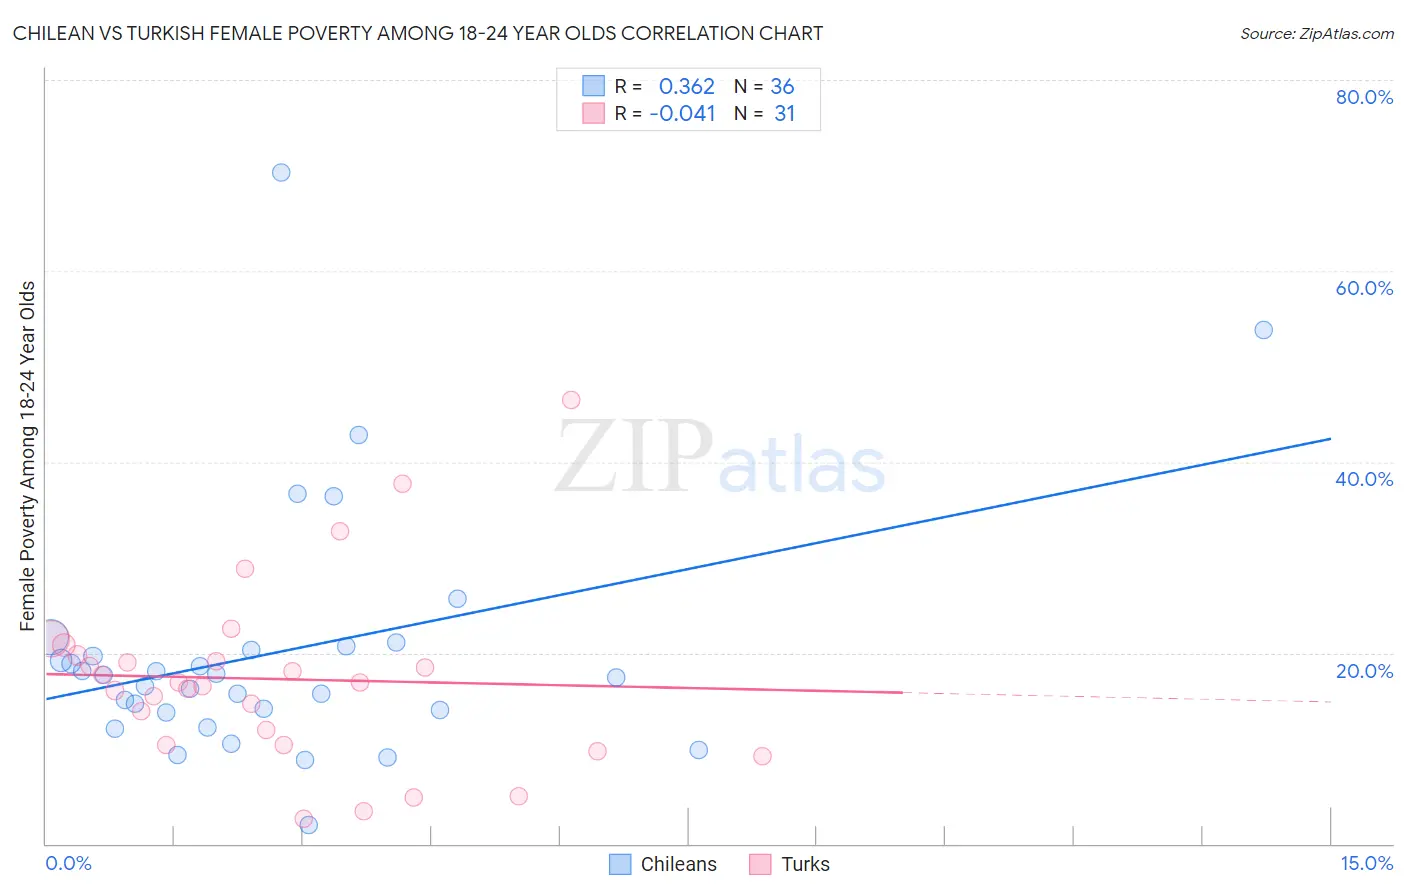 Chilean vs Turkish Female Poverty Among 18-24 Year Olds